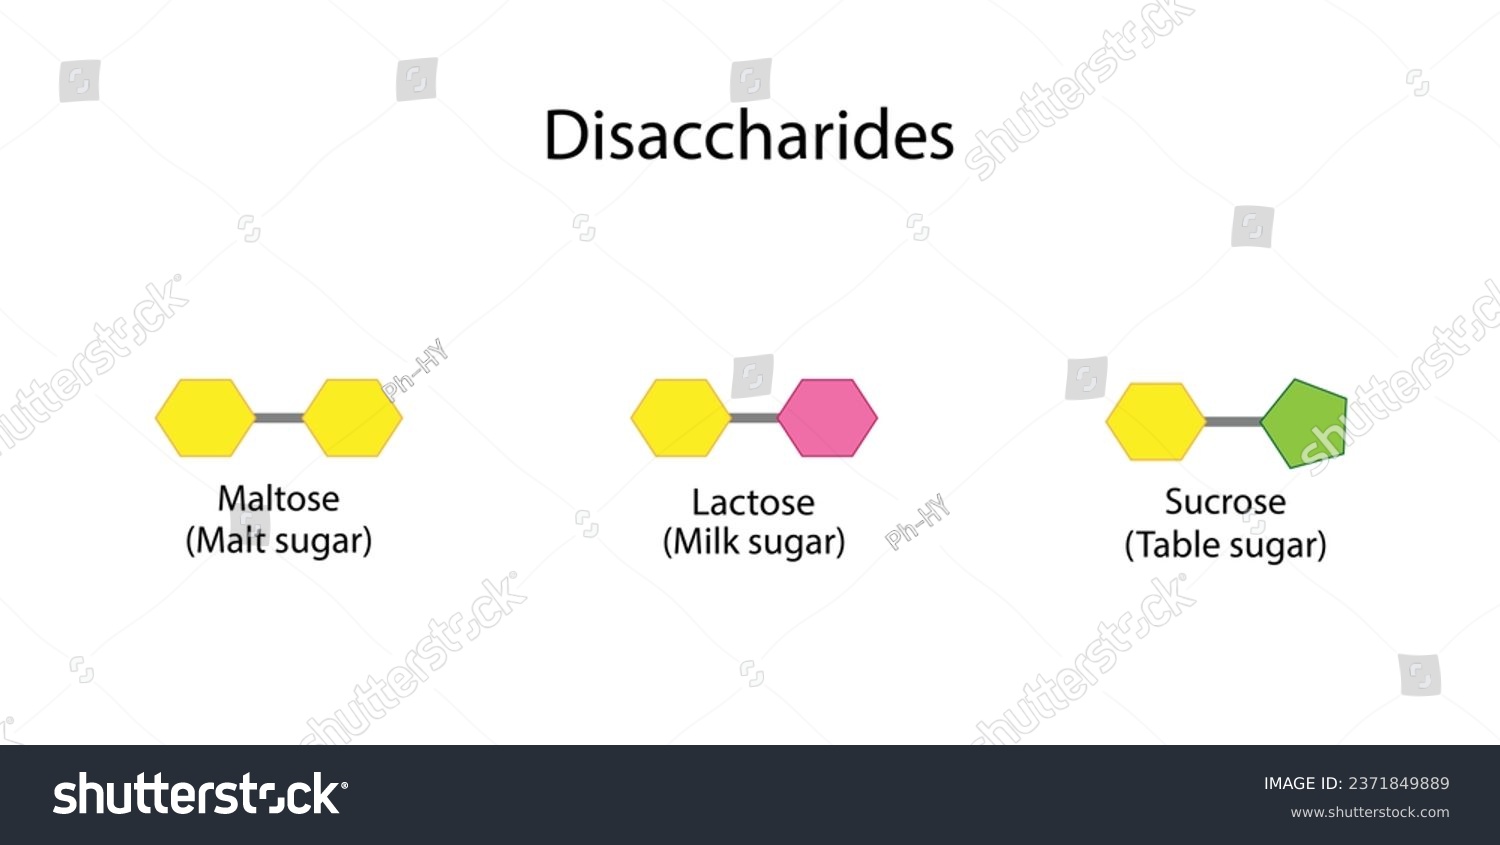 SVG of Carbohydrates Digestion. Maltase, Sucrase and Lactase Enzymes catalyze Disaccharides Maltose, Lactose and Sucrose to Monosaccharides, glucose, galactose and Fructose molecules. Vector Illustration svg